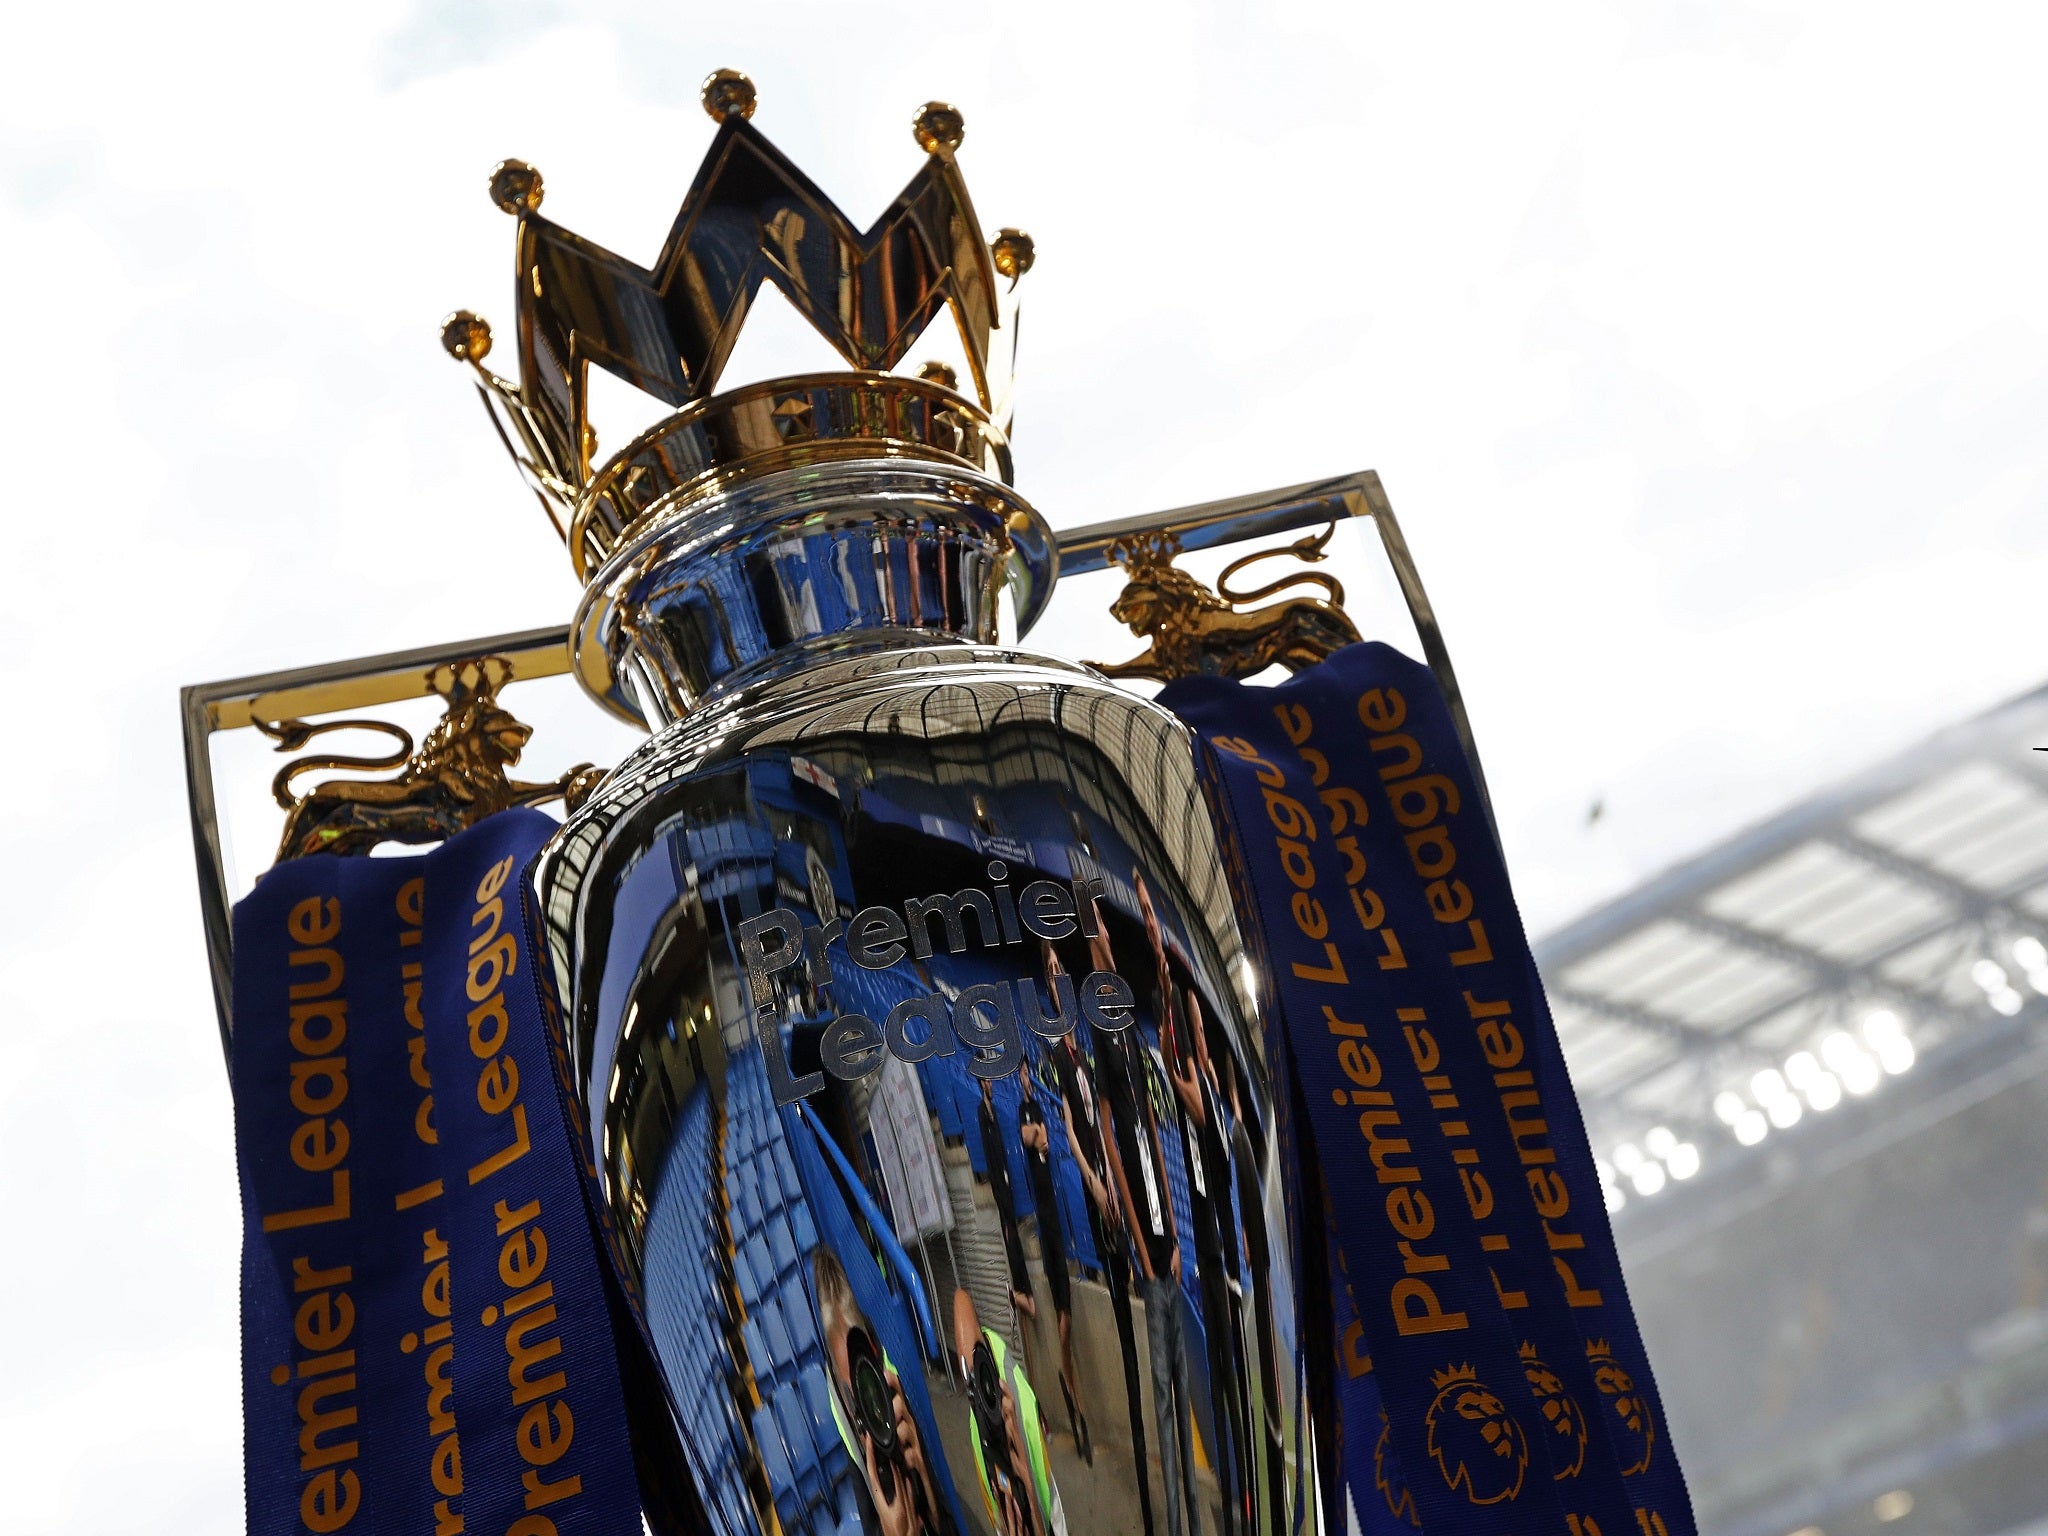 The Premier League trophy, last won by Leicester City in 2015/16